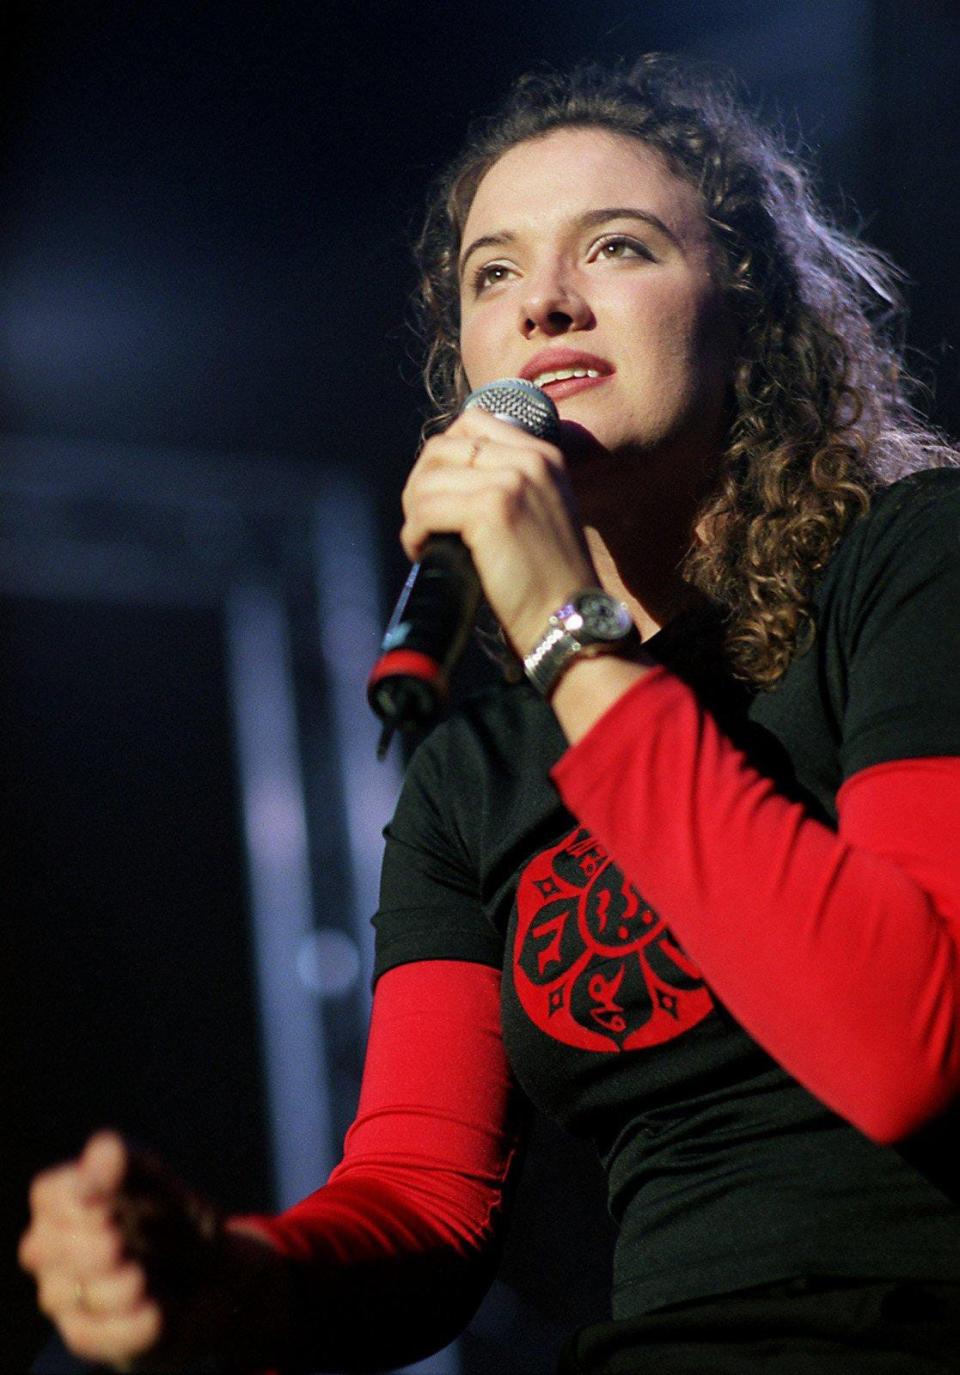 Christian singer Rebecca St. James performs during the Youth Evangelical Conference at Vanderbilt's Memorial Gymnasium March 10, 2000.